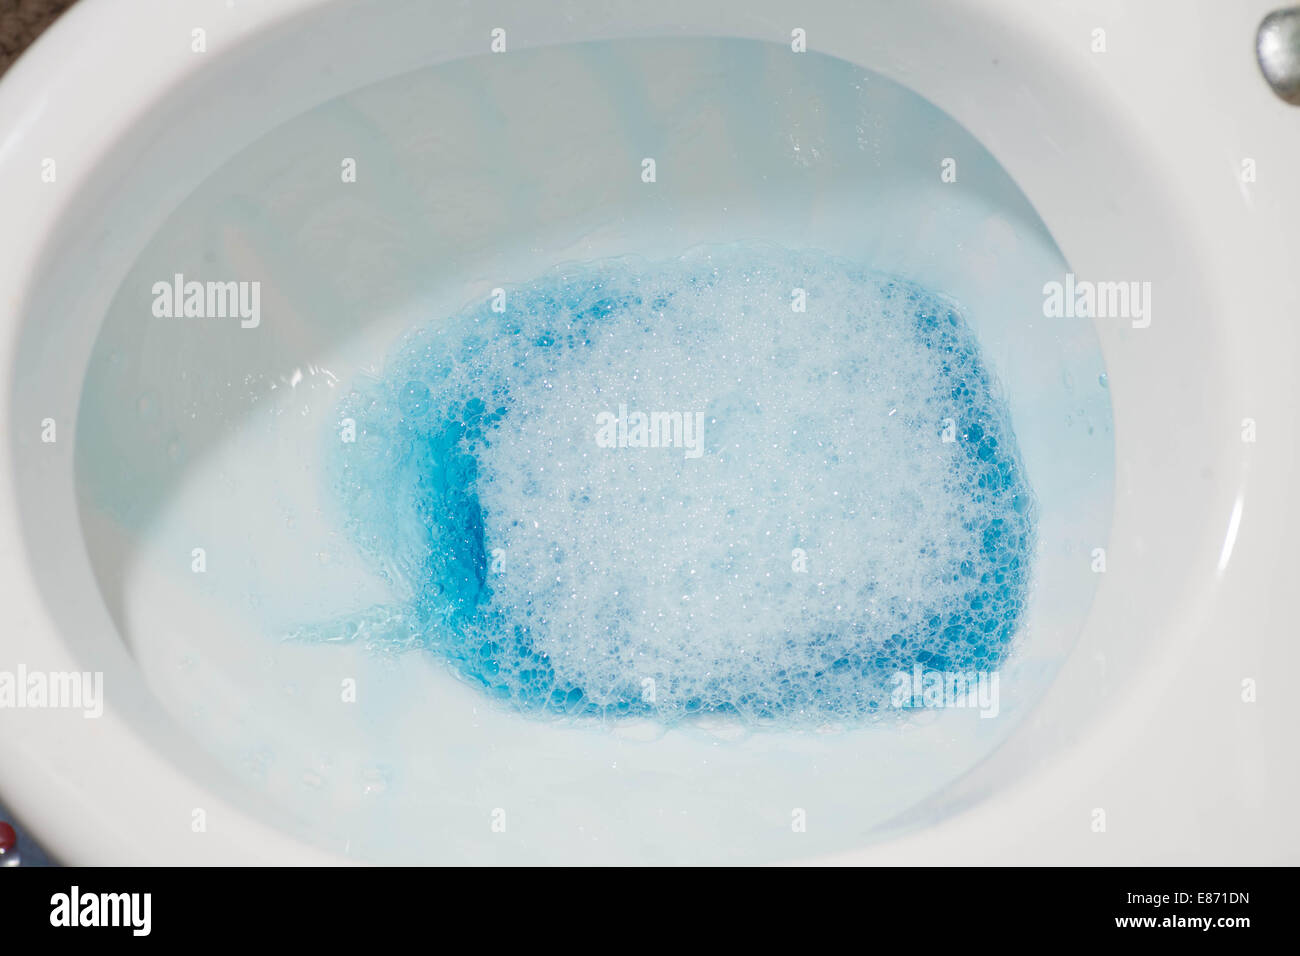 toilet bowl with blue water inside Stock Photo - Alamy